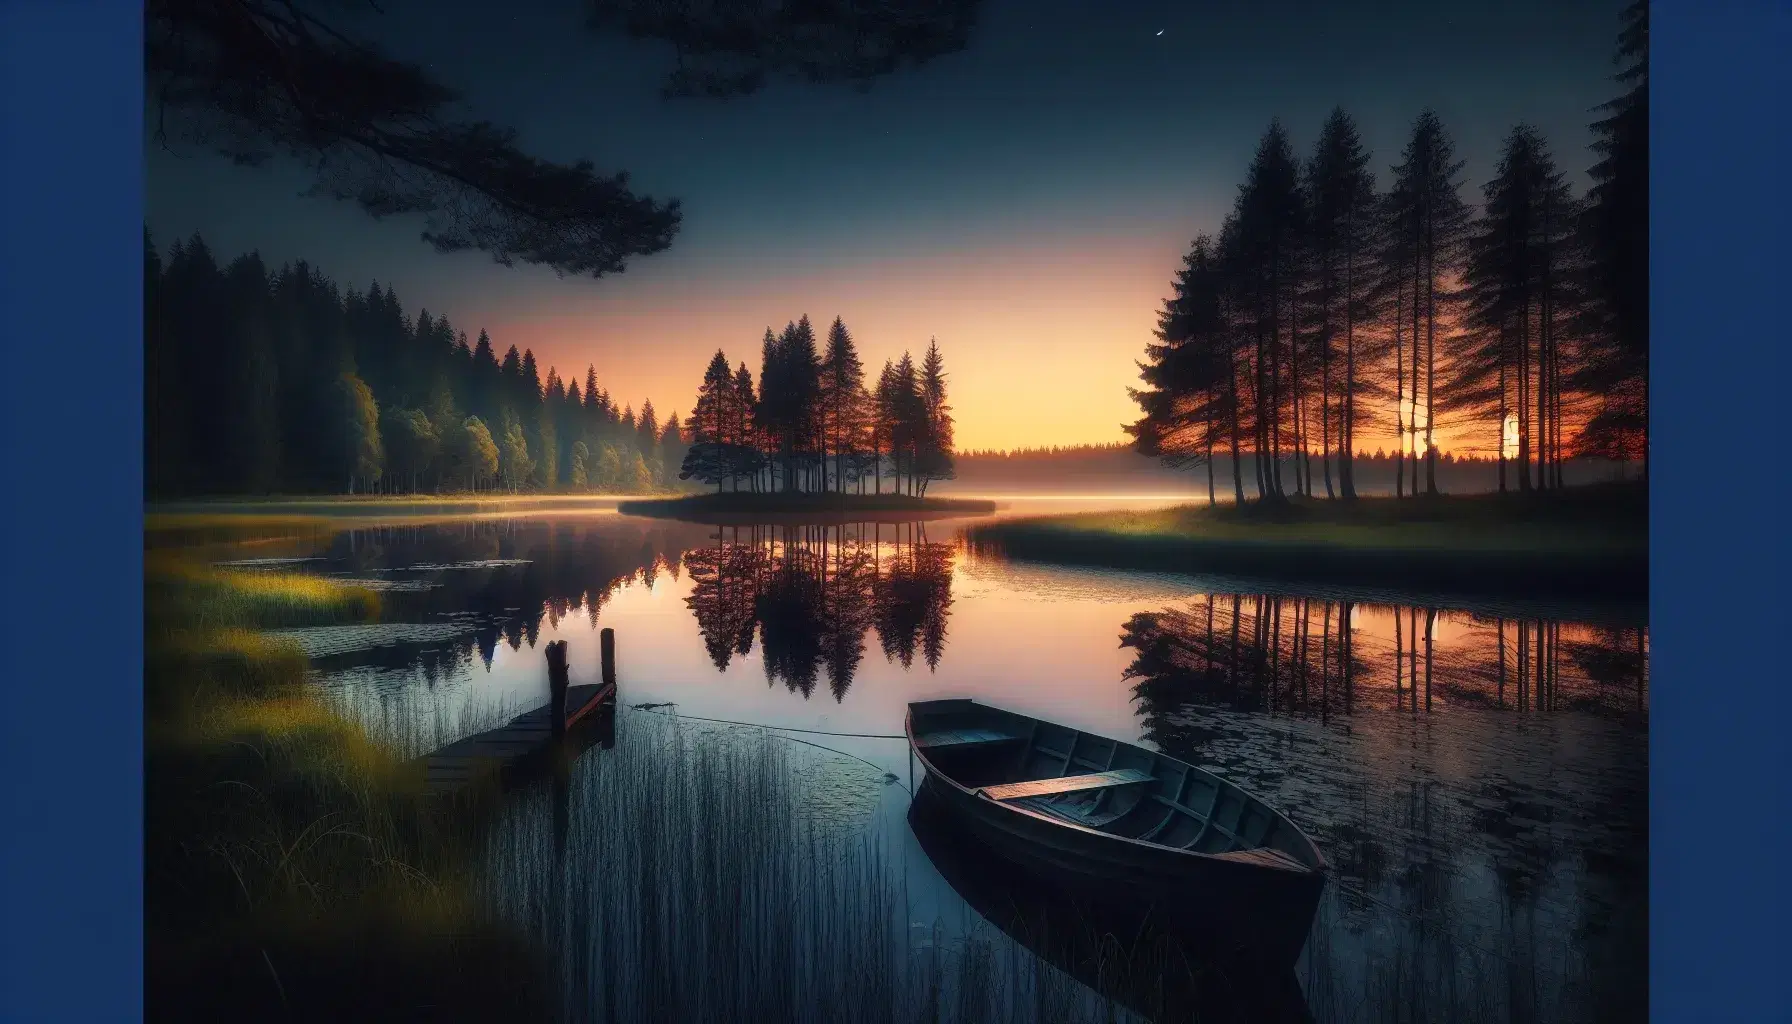 Twilight landscape with a reflective lake, tethered rowboat at a dock, heron by the water's edge, and a gradient sky transitioning from orange to blue.